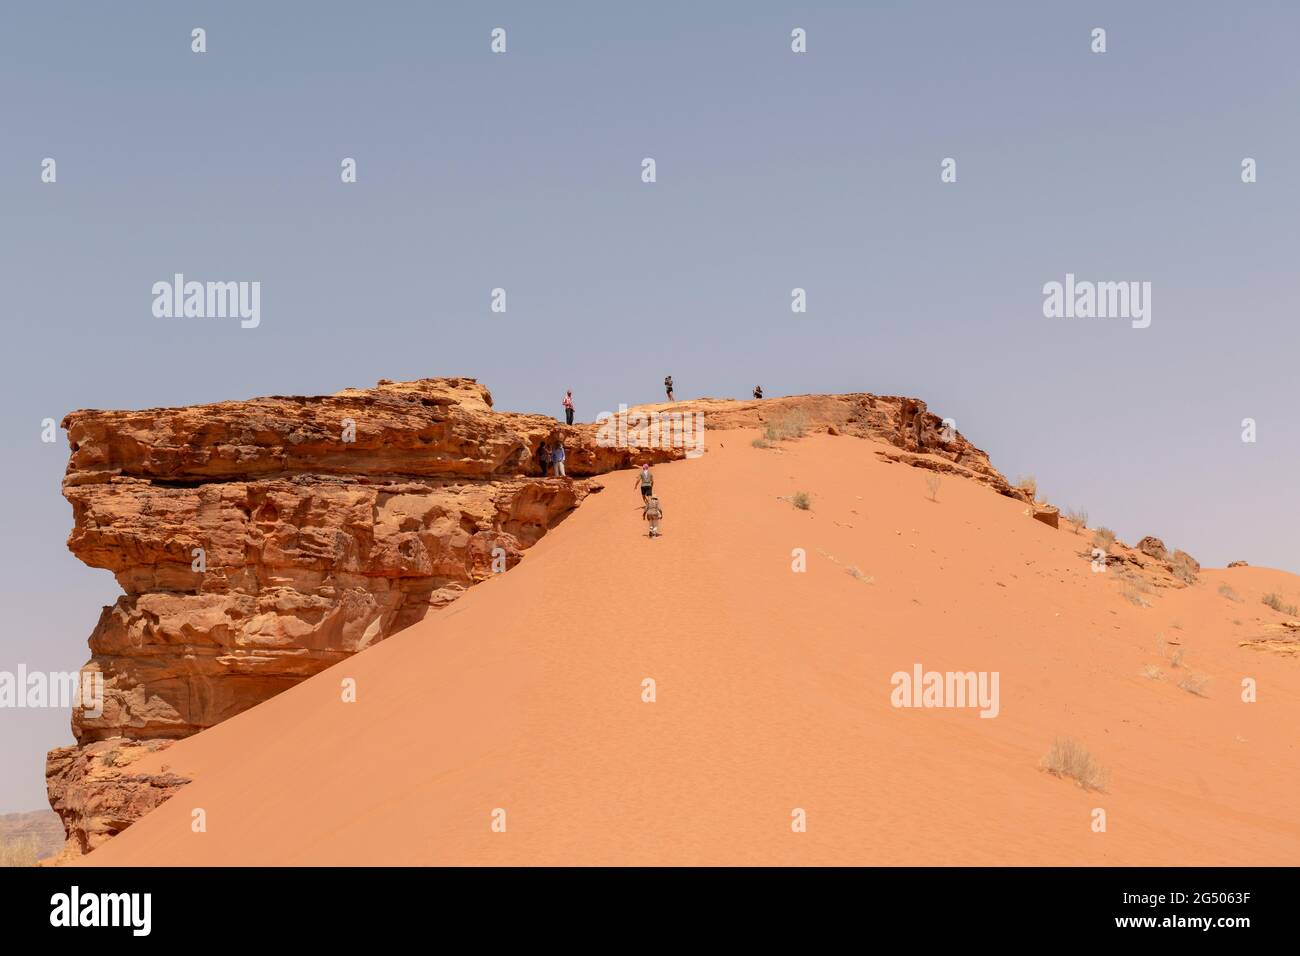 Tourists exploring the Wadi Rum Protected Area. Wadi Rum or Valley of the Moon is famous for its stunning desert landscape, desert valleys and dunes. Stock Photo